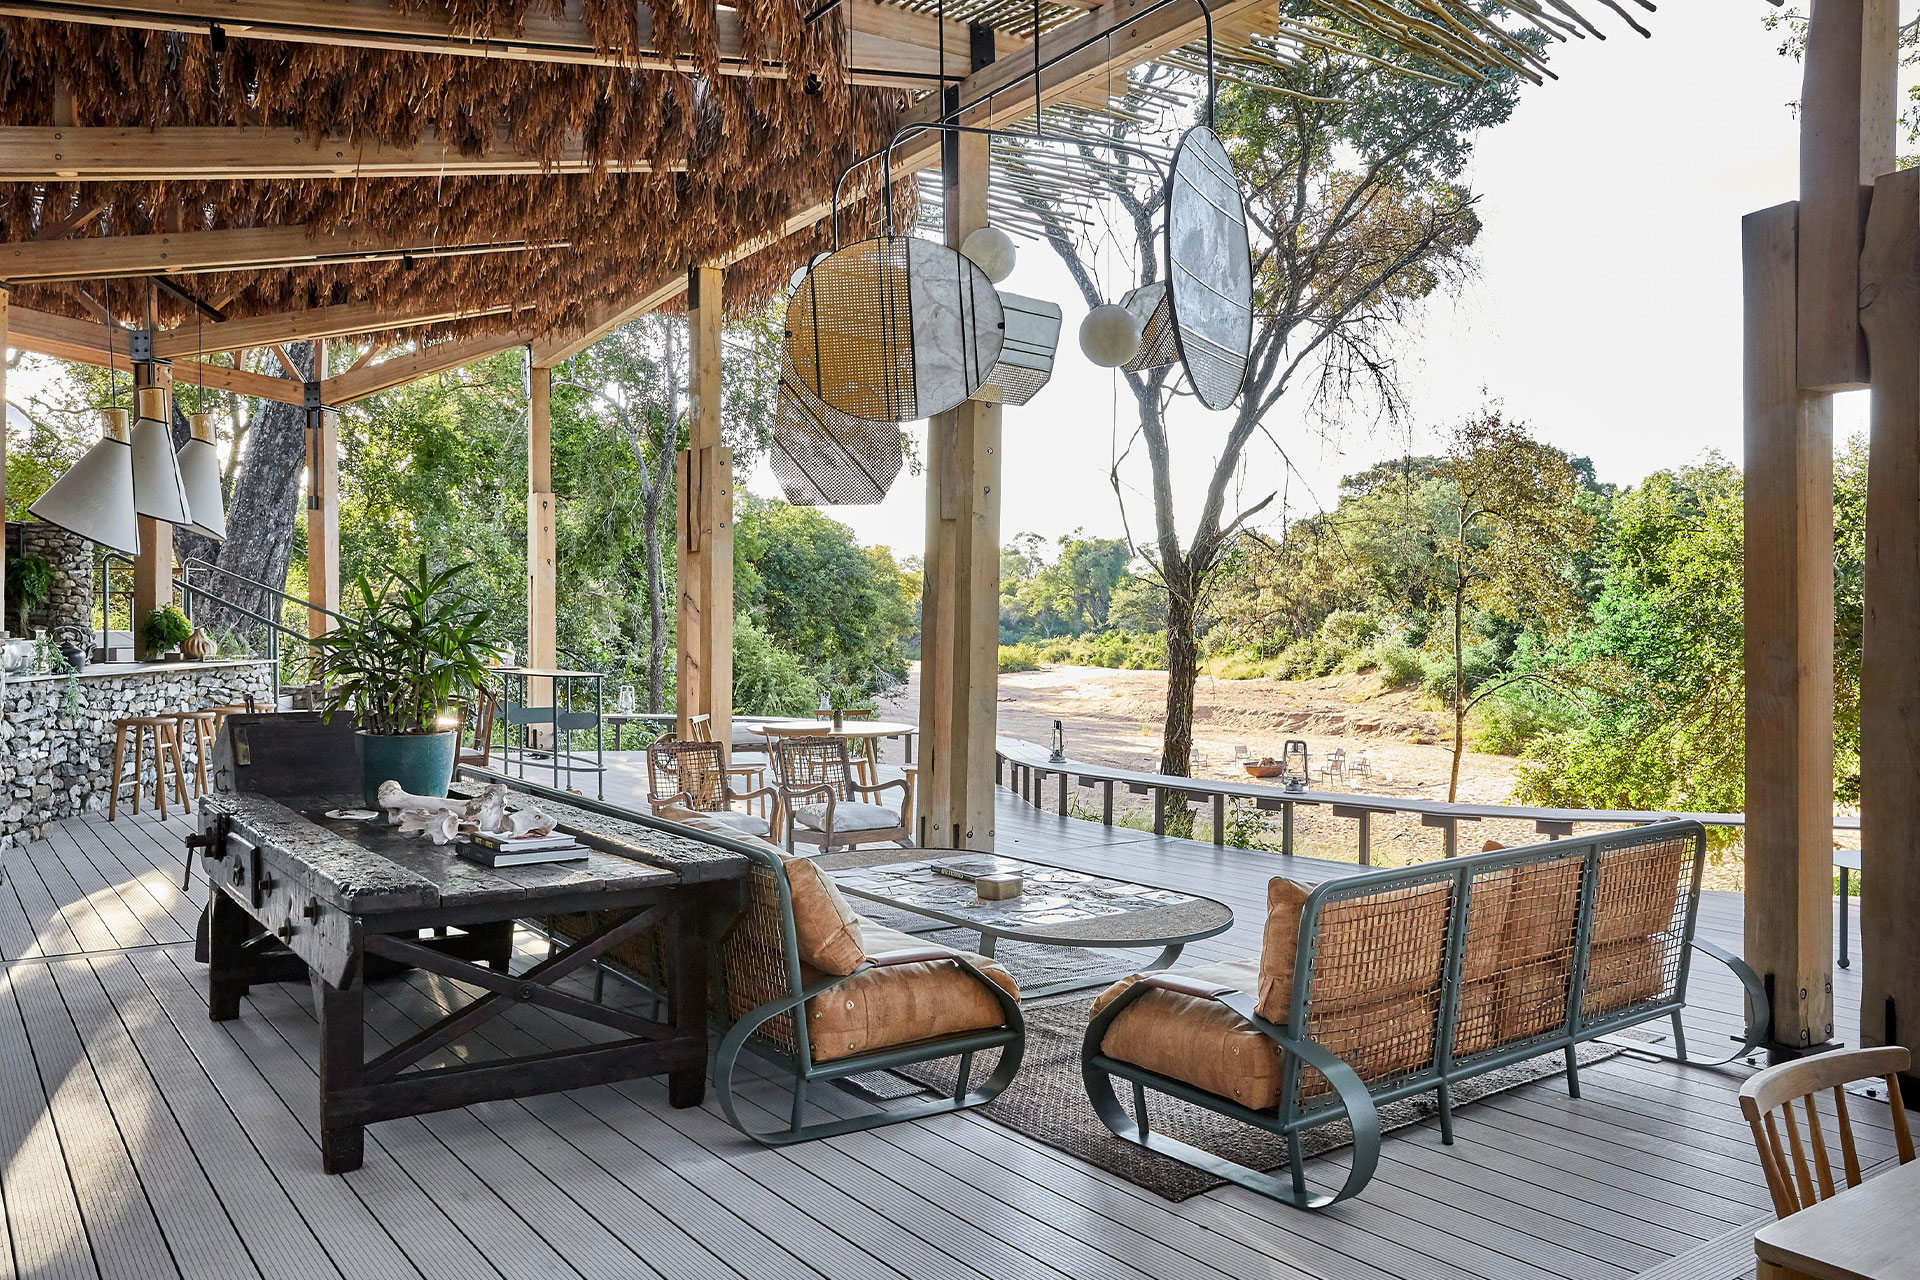 The luxurious lounge area overlooking the river bed at Saseka Tented Camp in Thornybush.